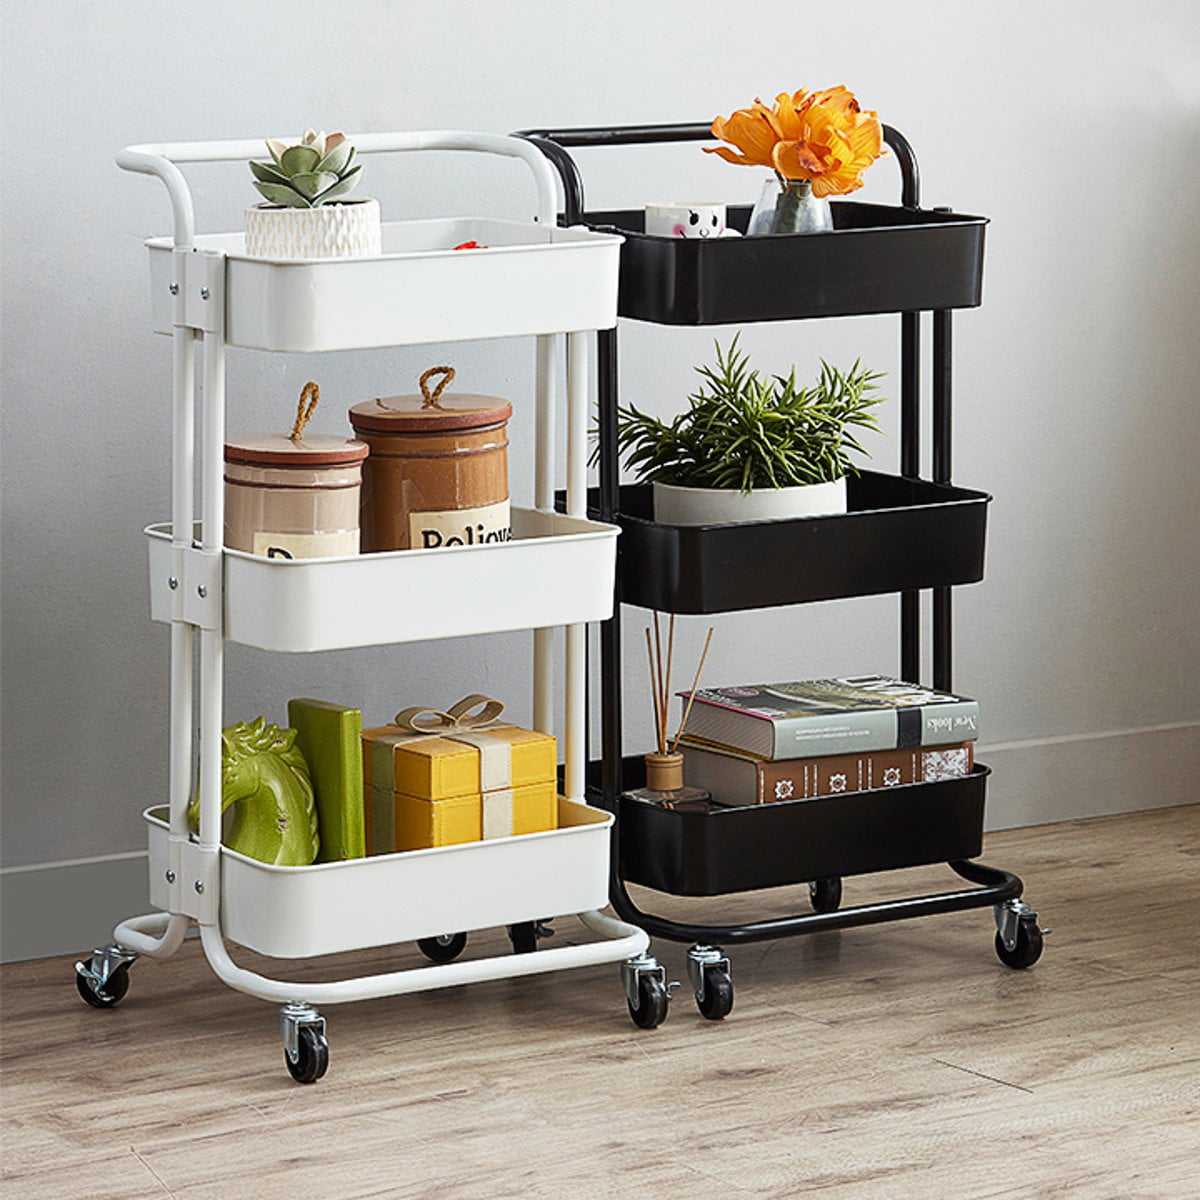 Movable Storage Organizer Shelves Multifunction Storage Trolley Service Cart with Lockable Wheels,Easy Assembly for Kitchen Bathroom Office PECHAM 3-Tier Rolling Utility Cart with Handle 